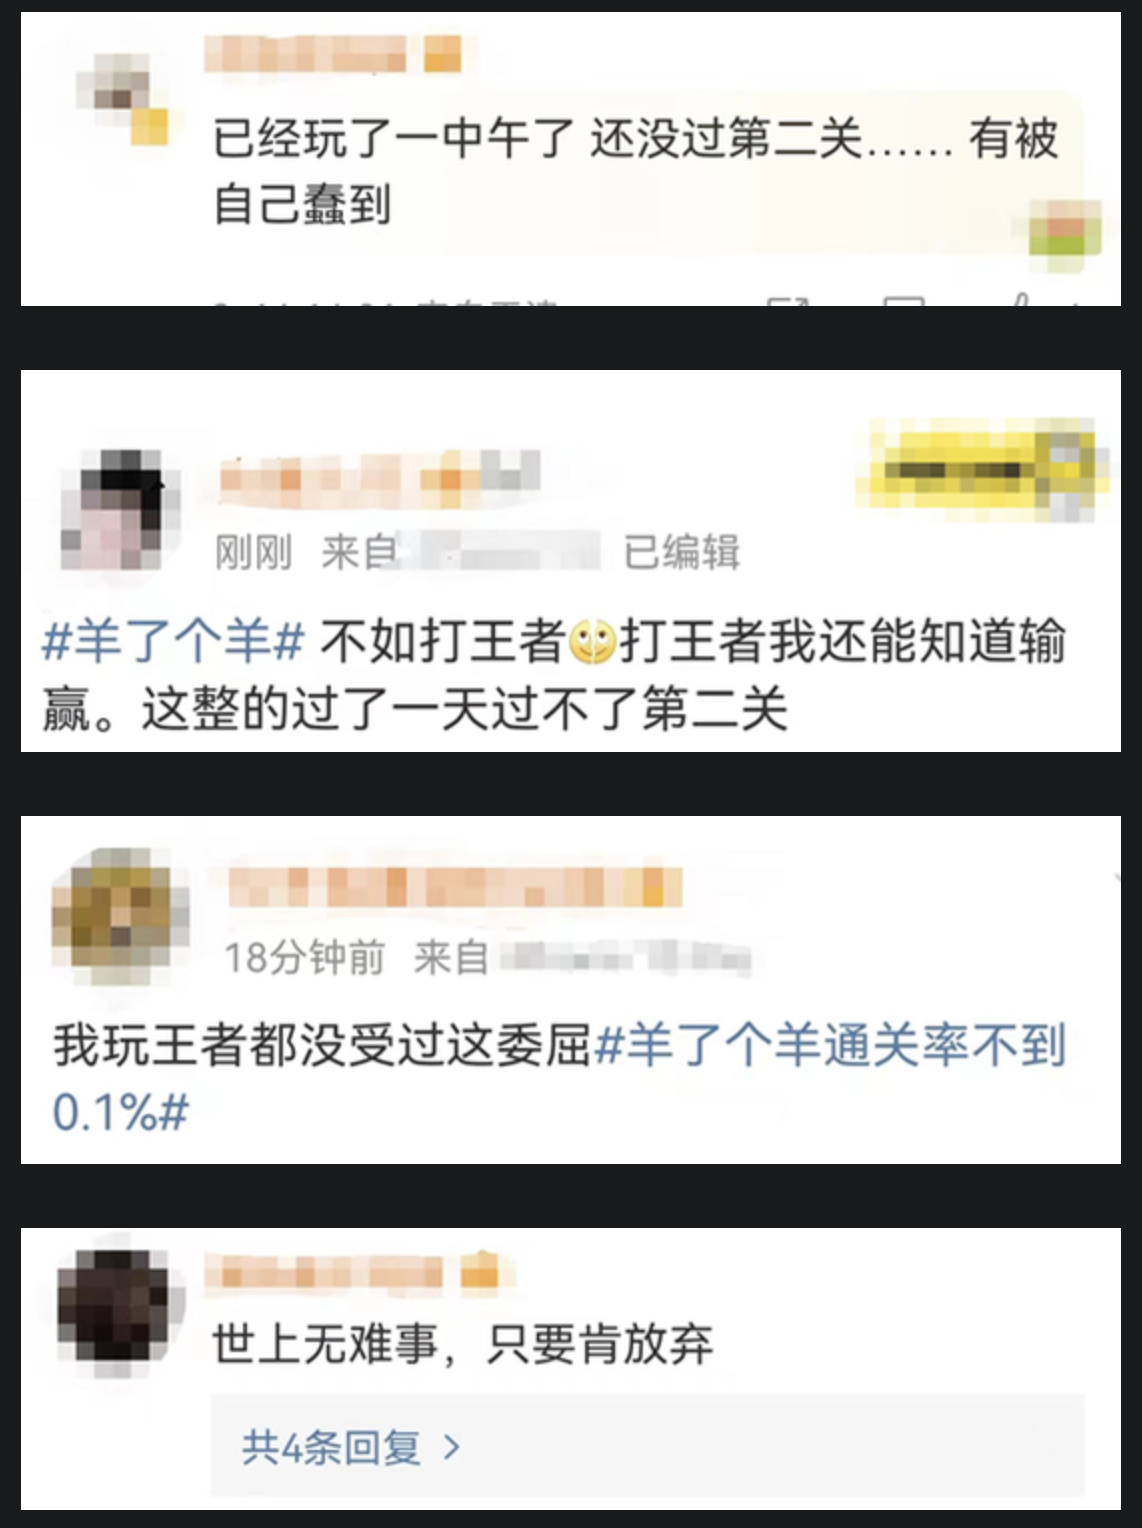 yangelegeyang-weibo-comments.png